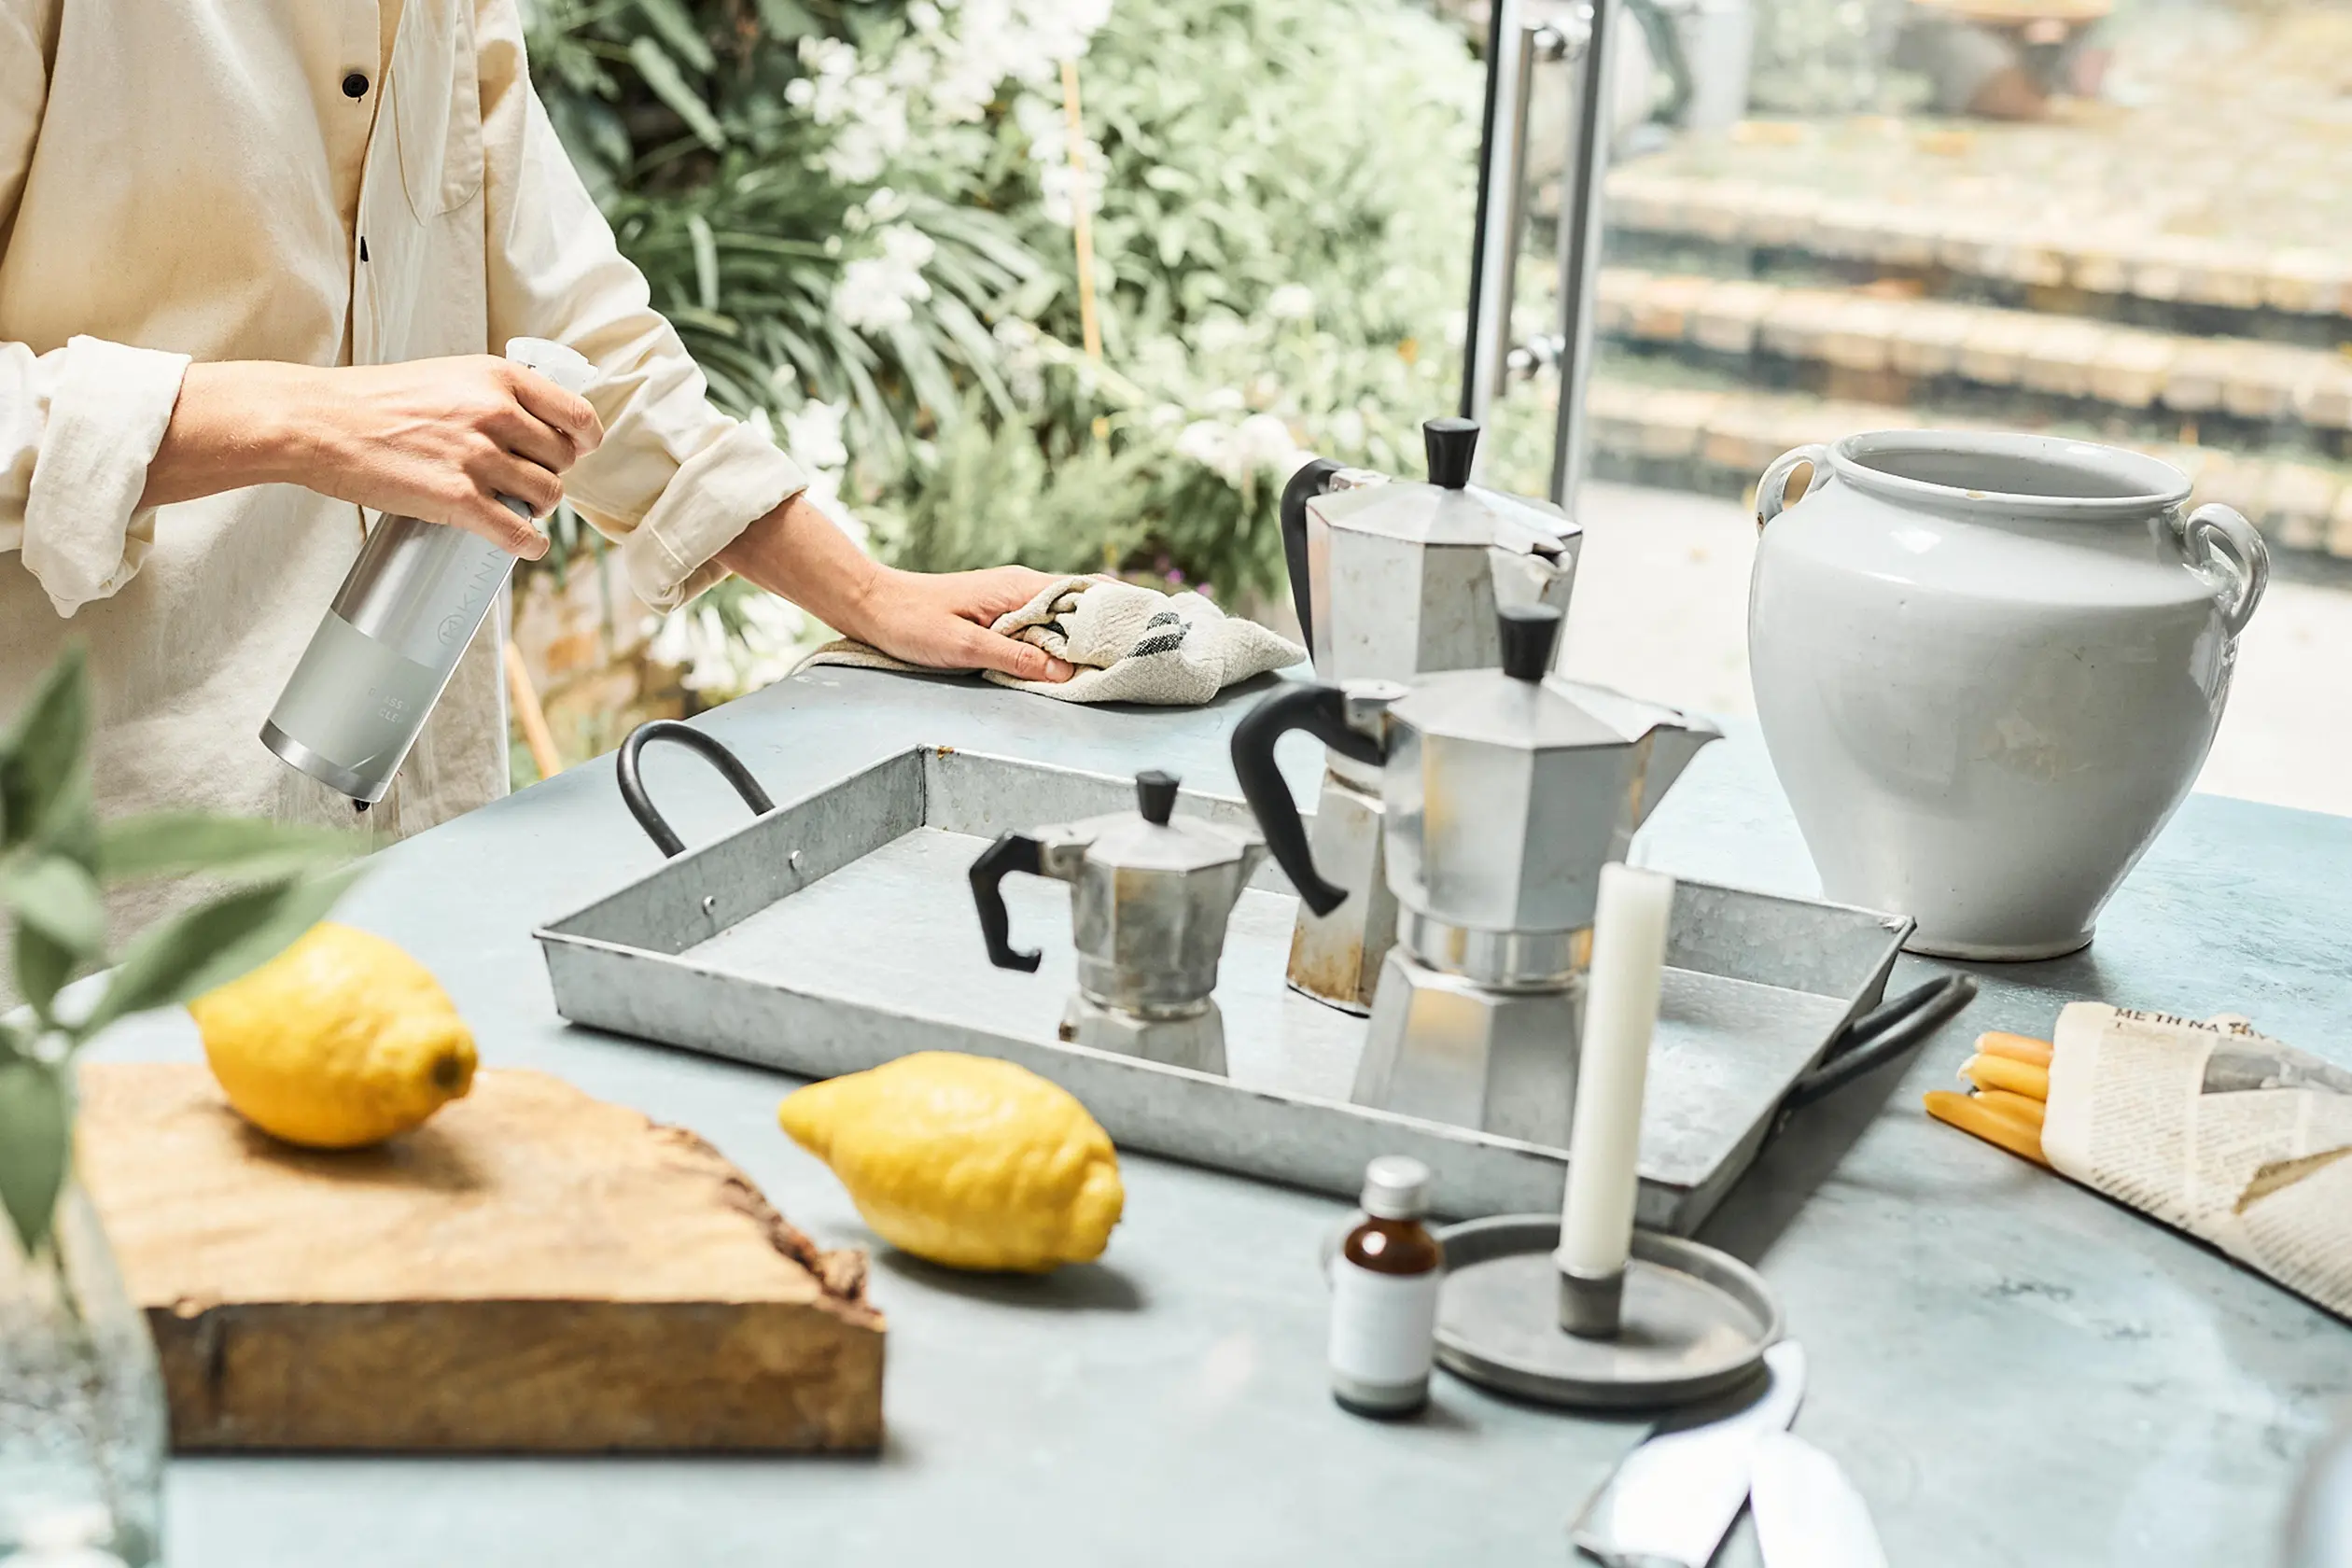 https://trinature.com.au/wp-content/uploads/2019/11/Top-tips-for-eco-home-cleaning.jpg